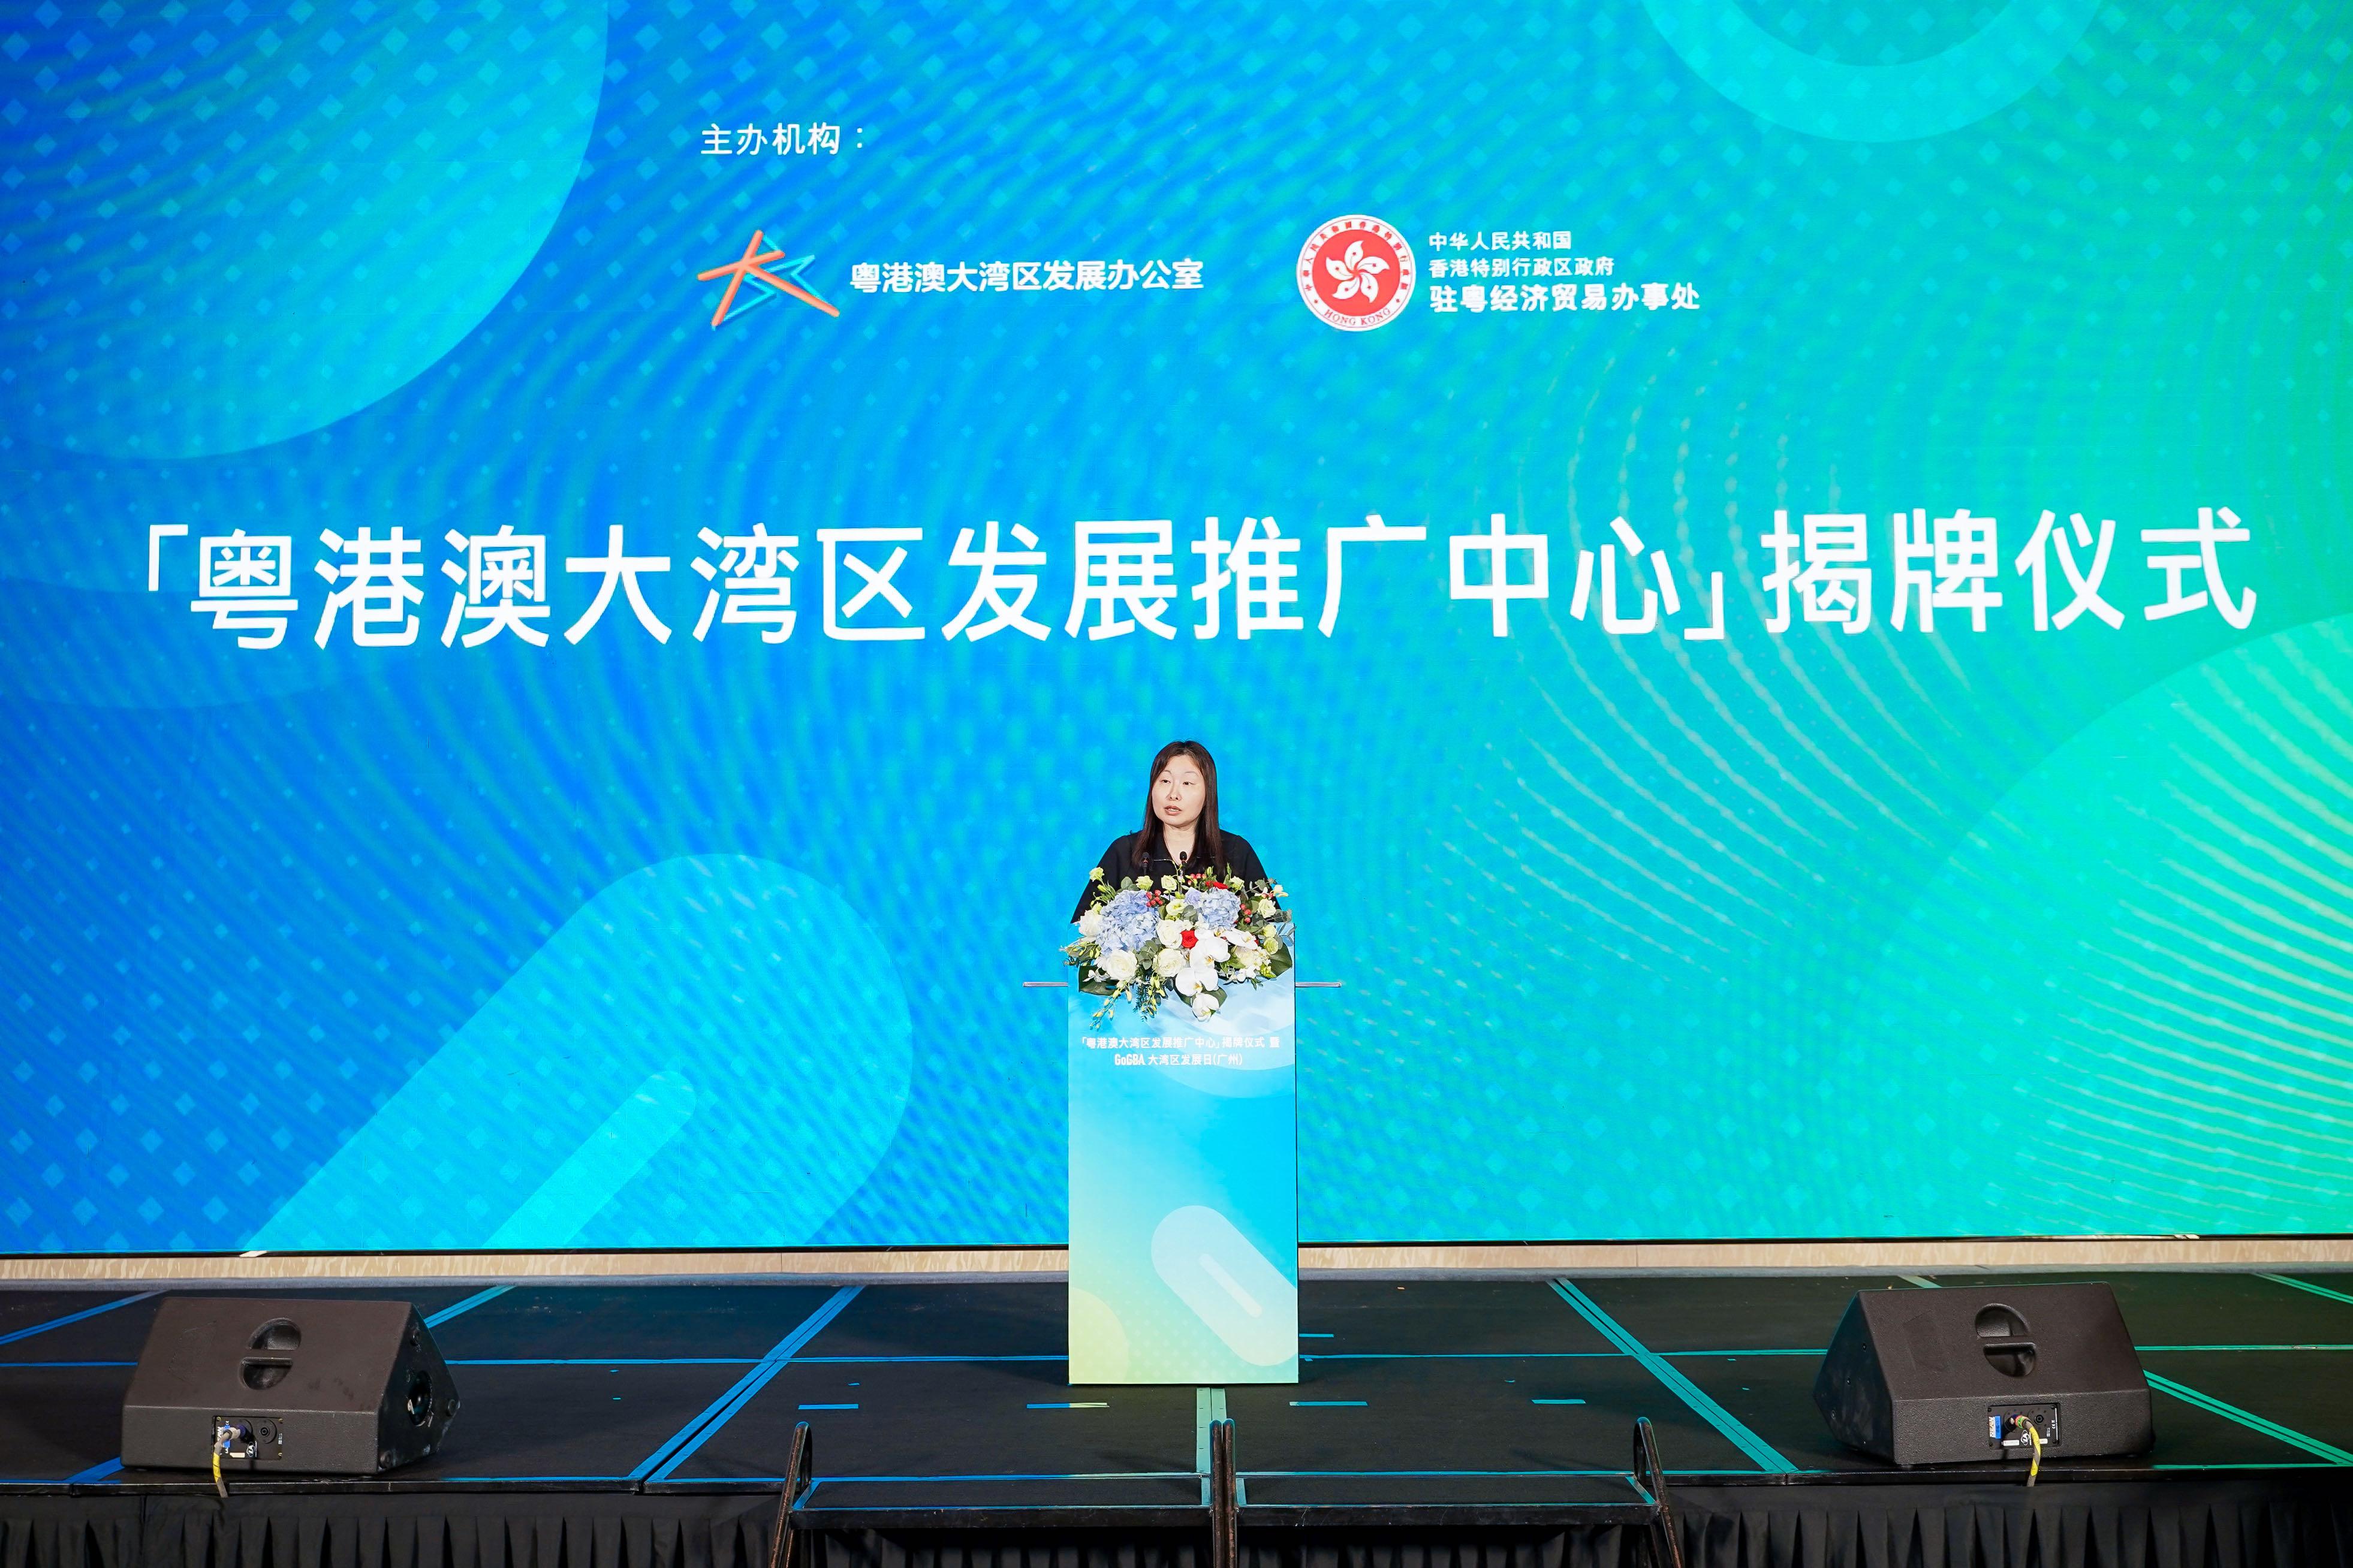 The Director of Hong Kong Economic and Trade Office in Guangdong, Miss Linda So, speaks at the plaque unveiling ceremony of the Guangdong-Hong Kong-Macao Greater Bay Area Development Promotion Centre in Guangzhou today (April 26).